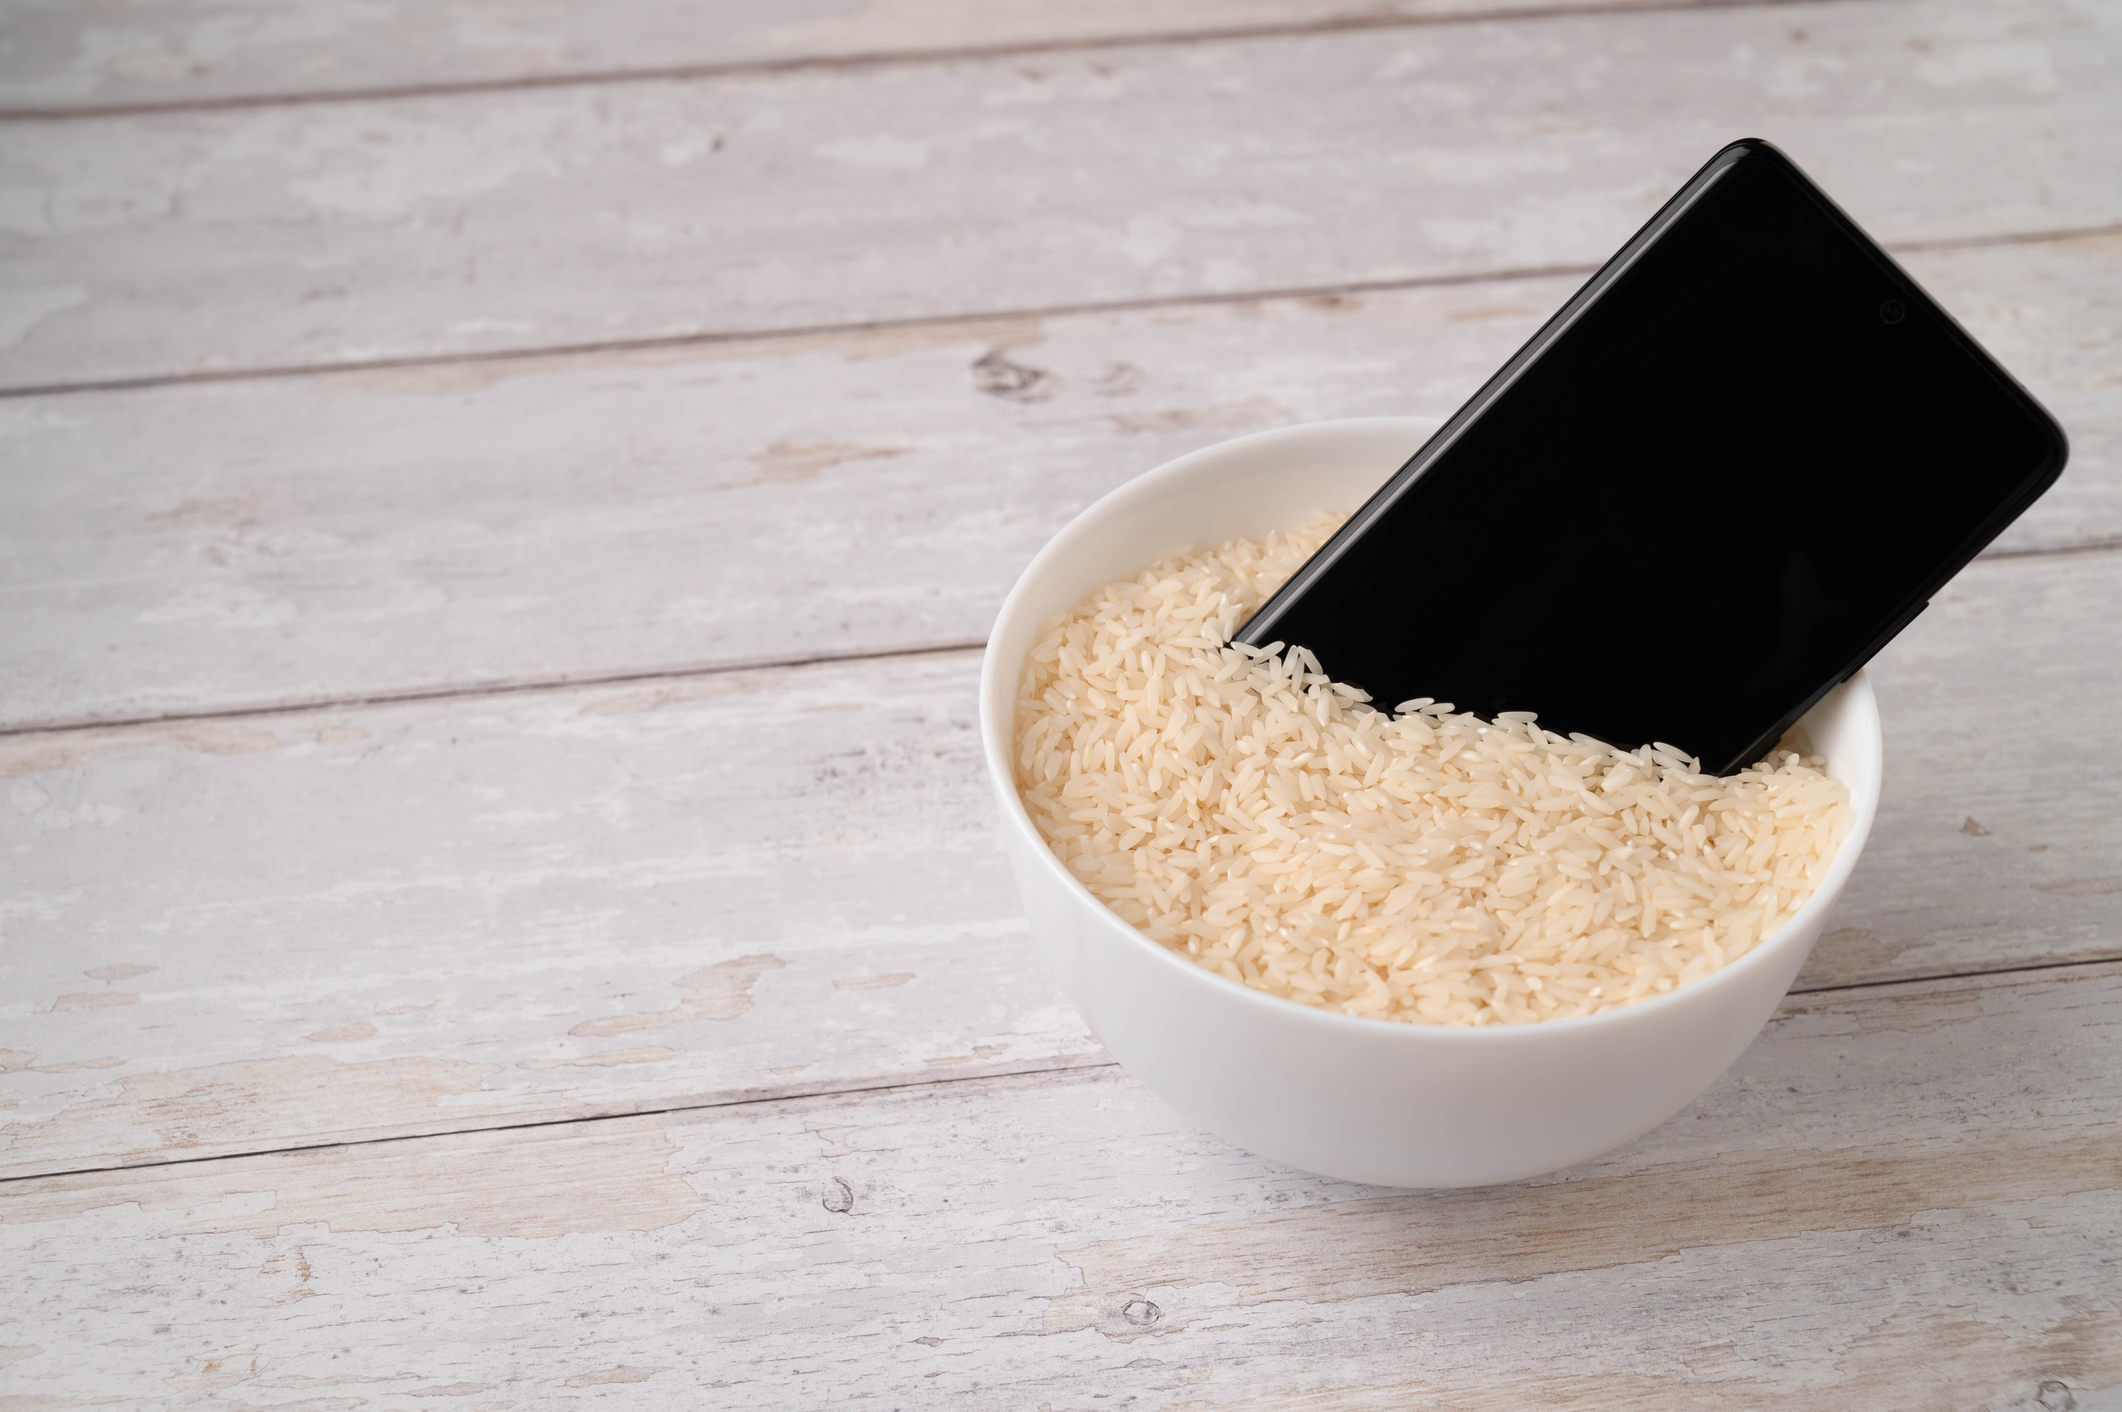 Apple Officially Warns Users to Stop Putting Wet iPhones in Rice